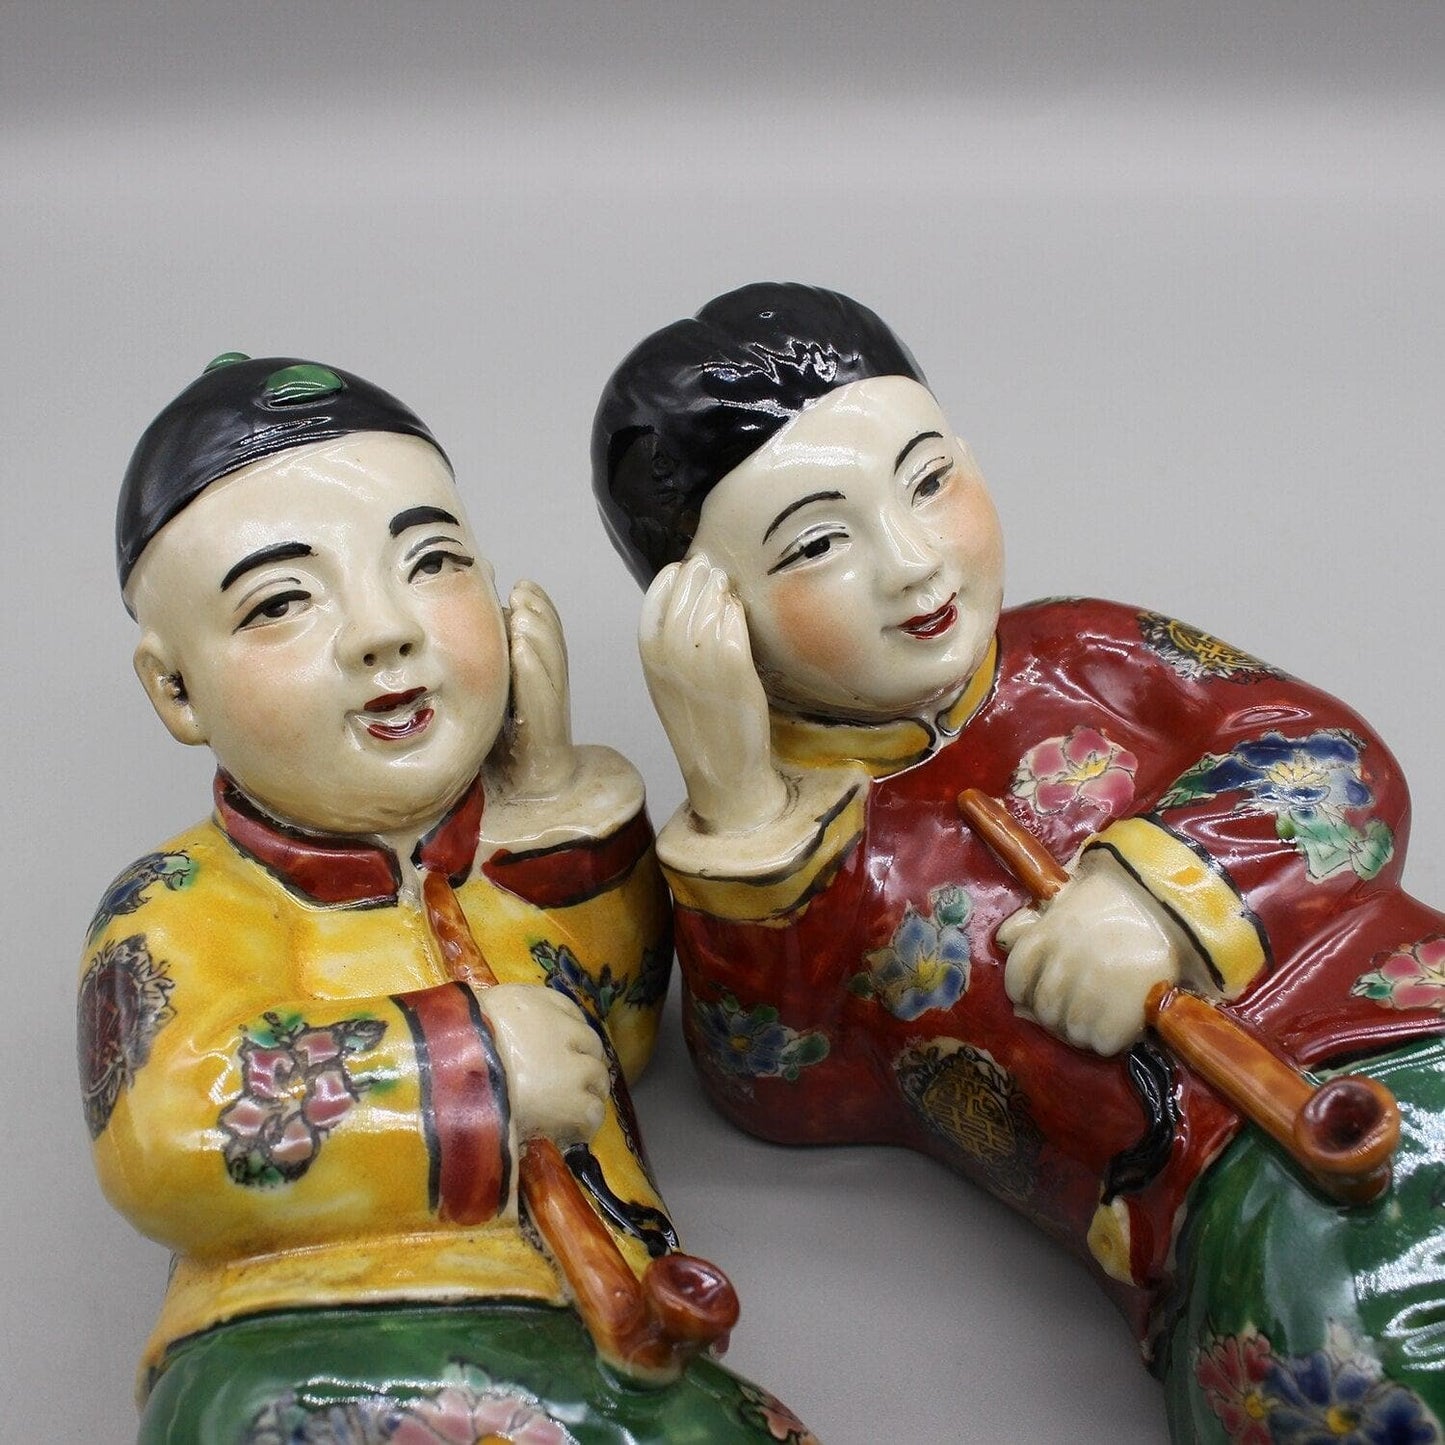 Hand Painted Traditional Chinese Men Figurines - 2 pcs - MAIA HOMES